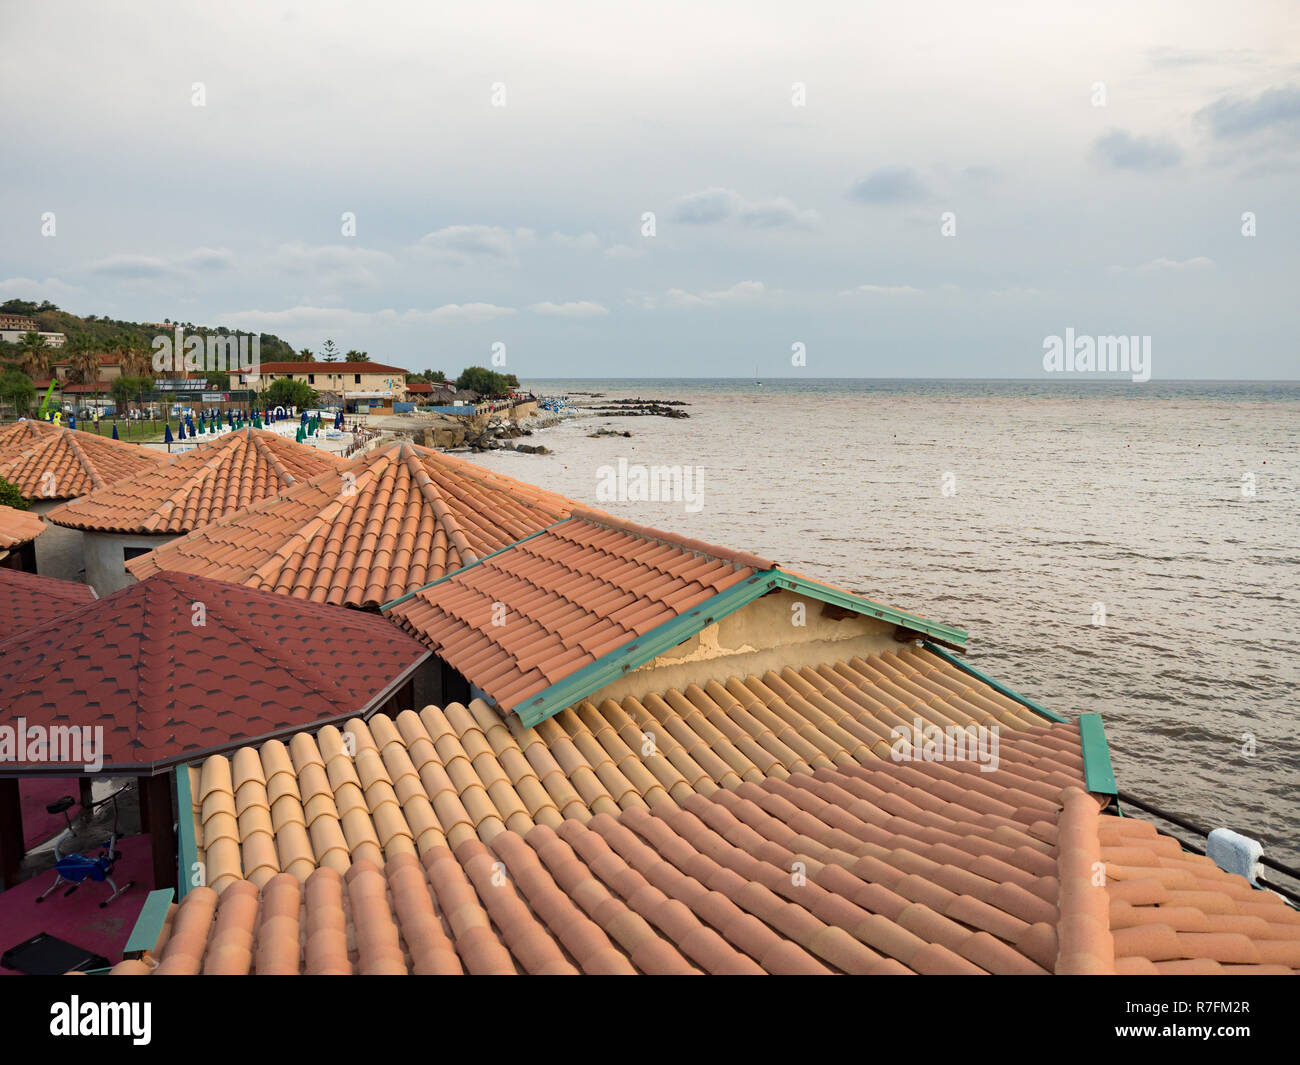 Tourist village in southern Italy on the coast of the Mediterranean Sea. Stock Photo